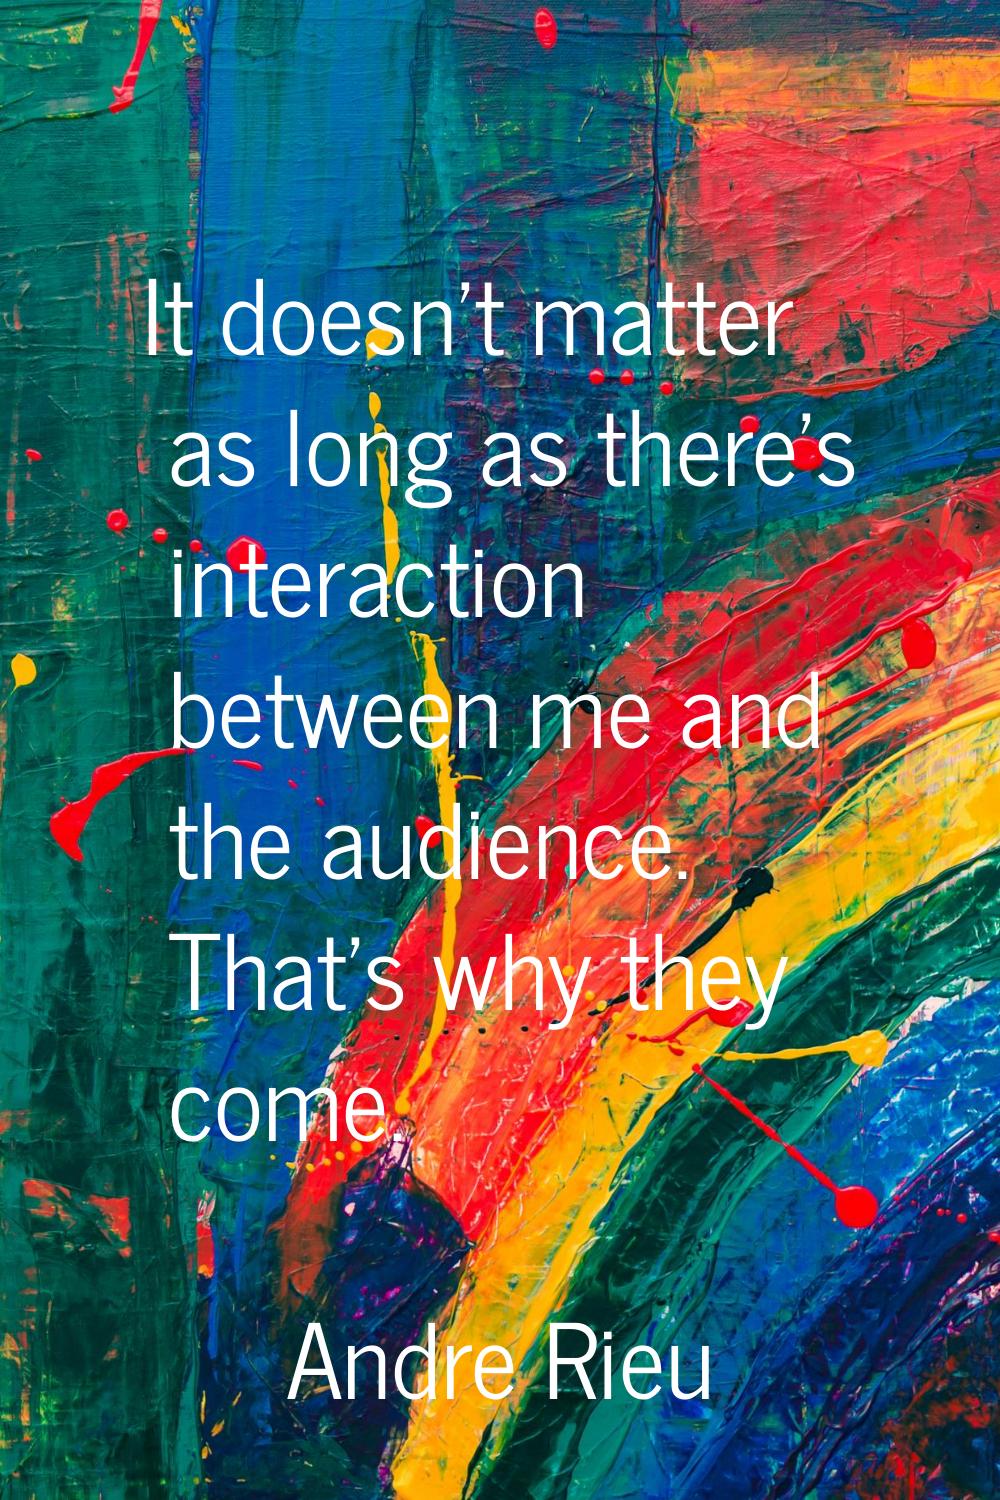 It doesn't matter as long as there's interaction between me and the audience. That's why they come.